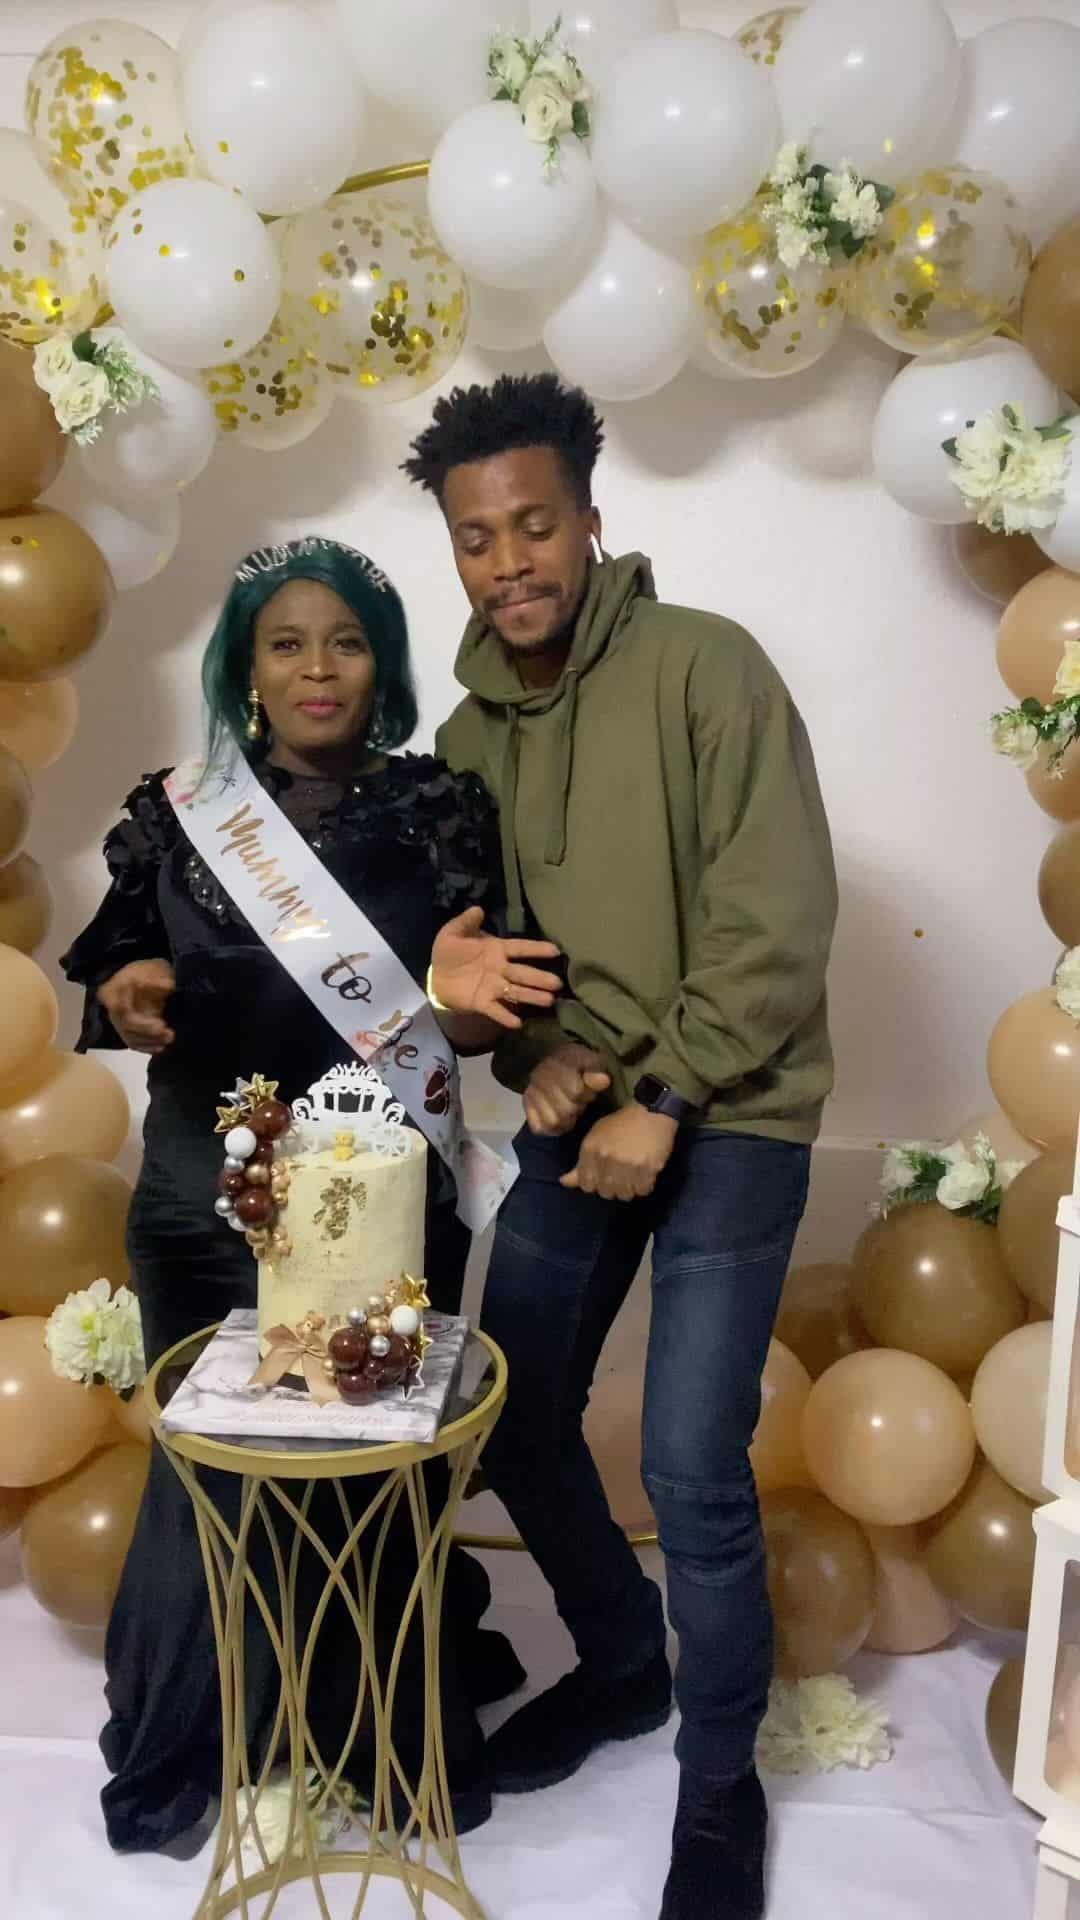 "After 5 miscarriages and 3 fail IVF, God Did it” - Actor Akeem Adeyemi excited as he welcomes son with wife